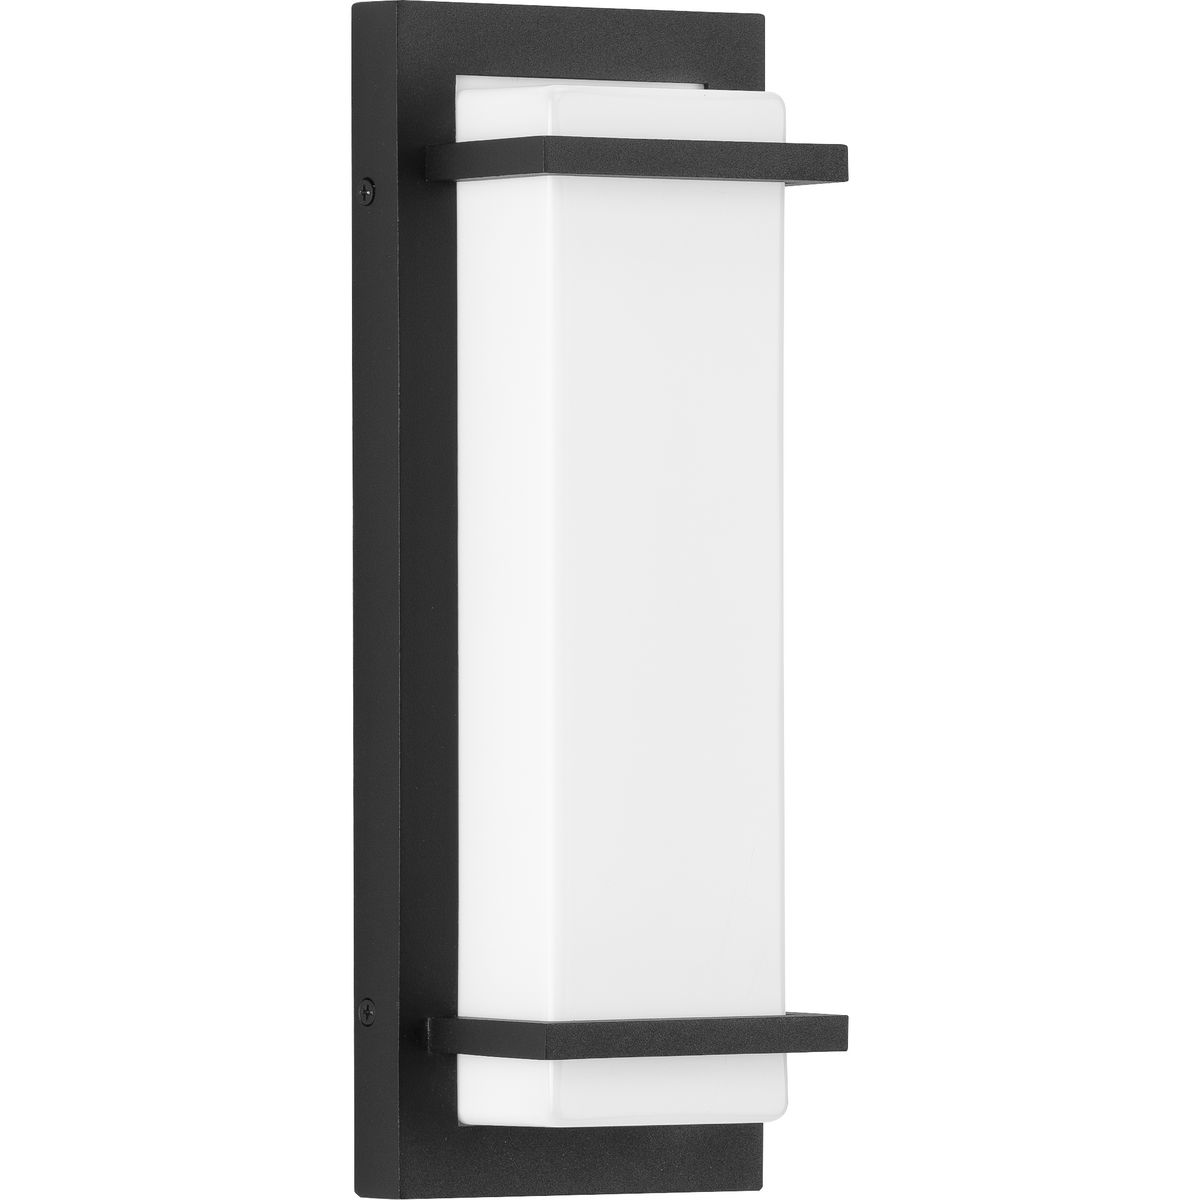 Z-1070 LED Collection 1-Light White Acrylic Shade Modern Outdoor Small Wall Sconce Light Metallic Gray 